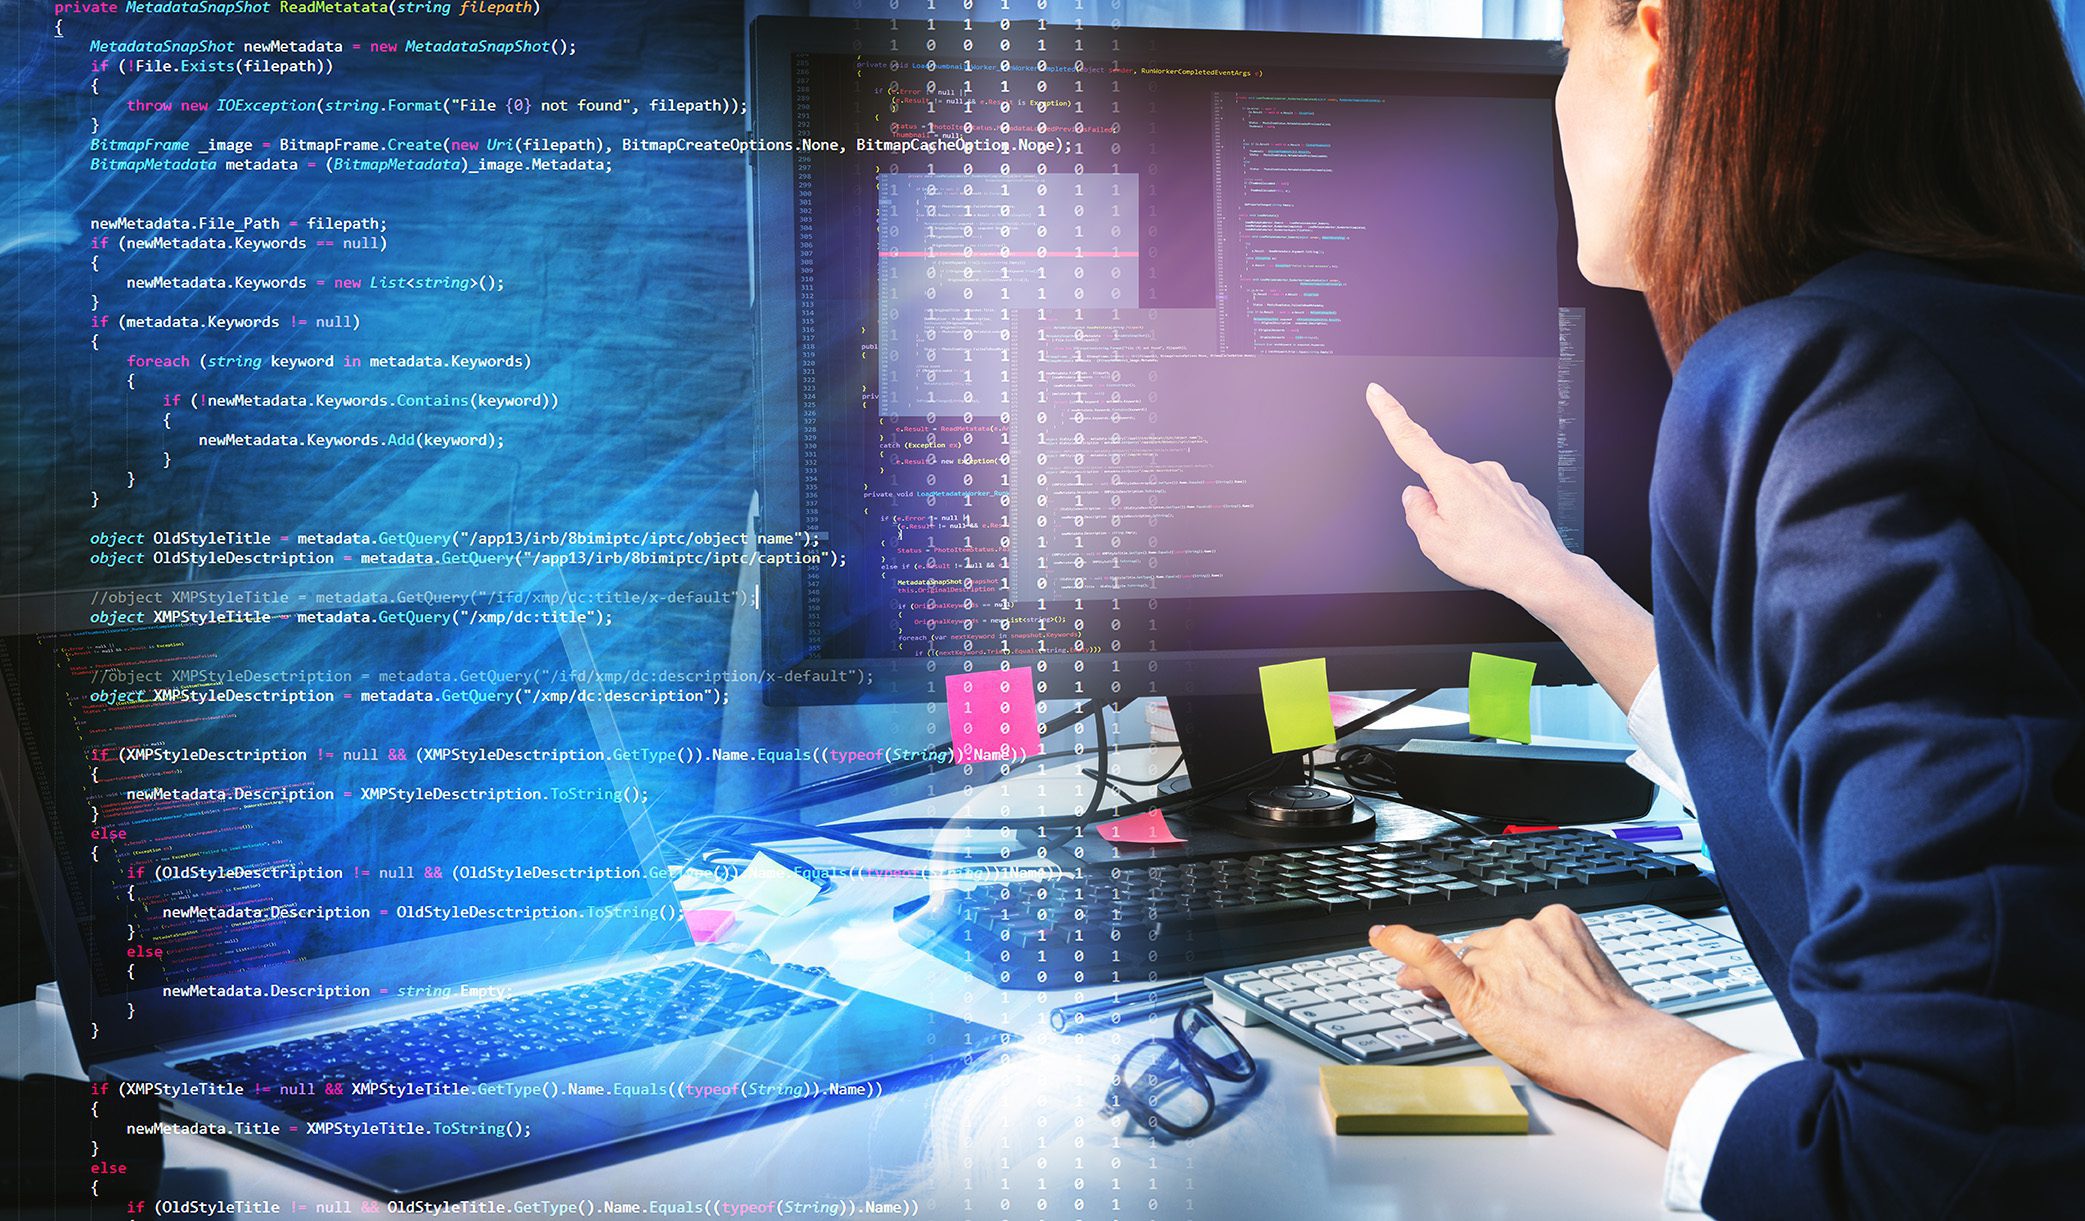 Stock image of woman coding